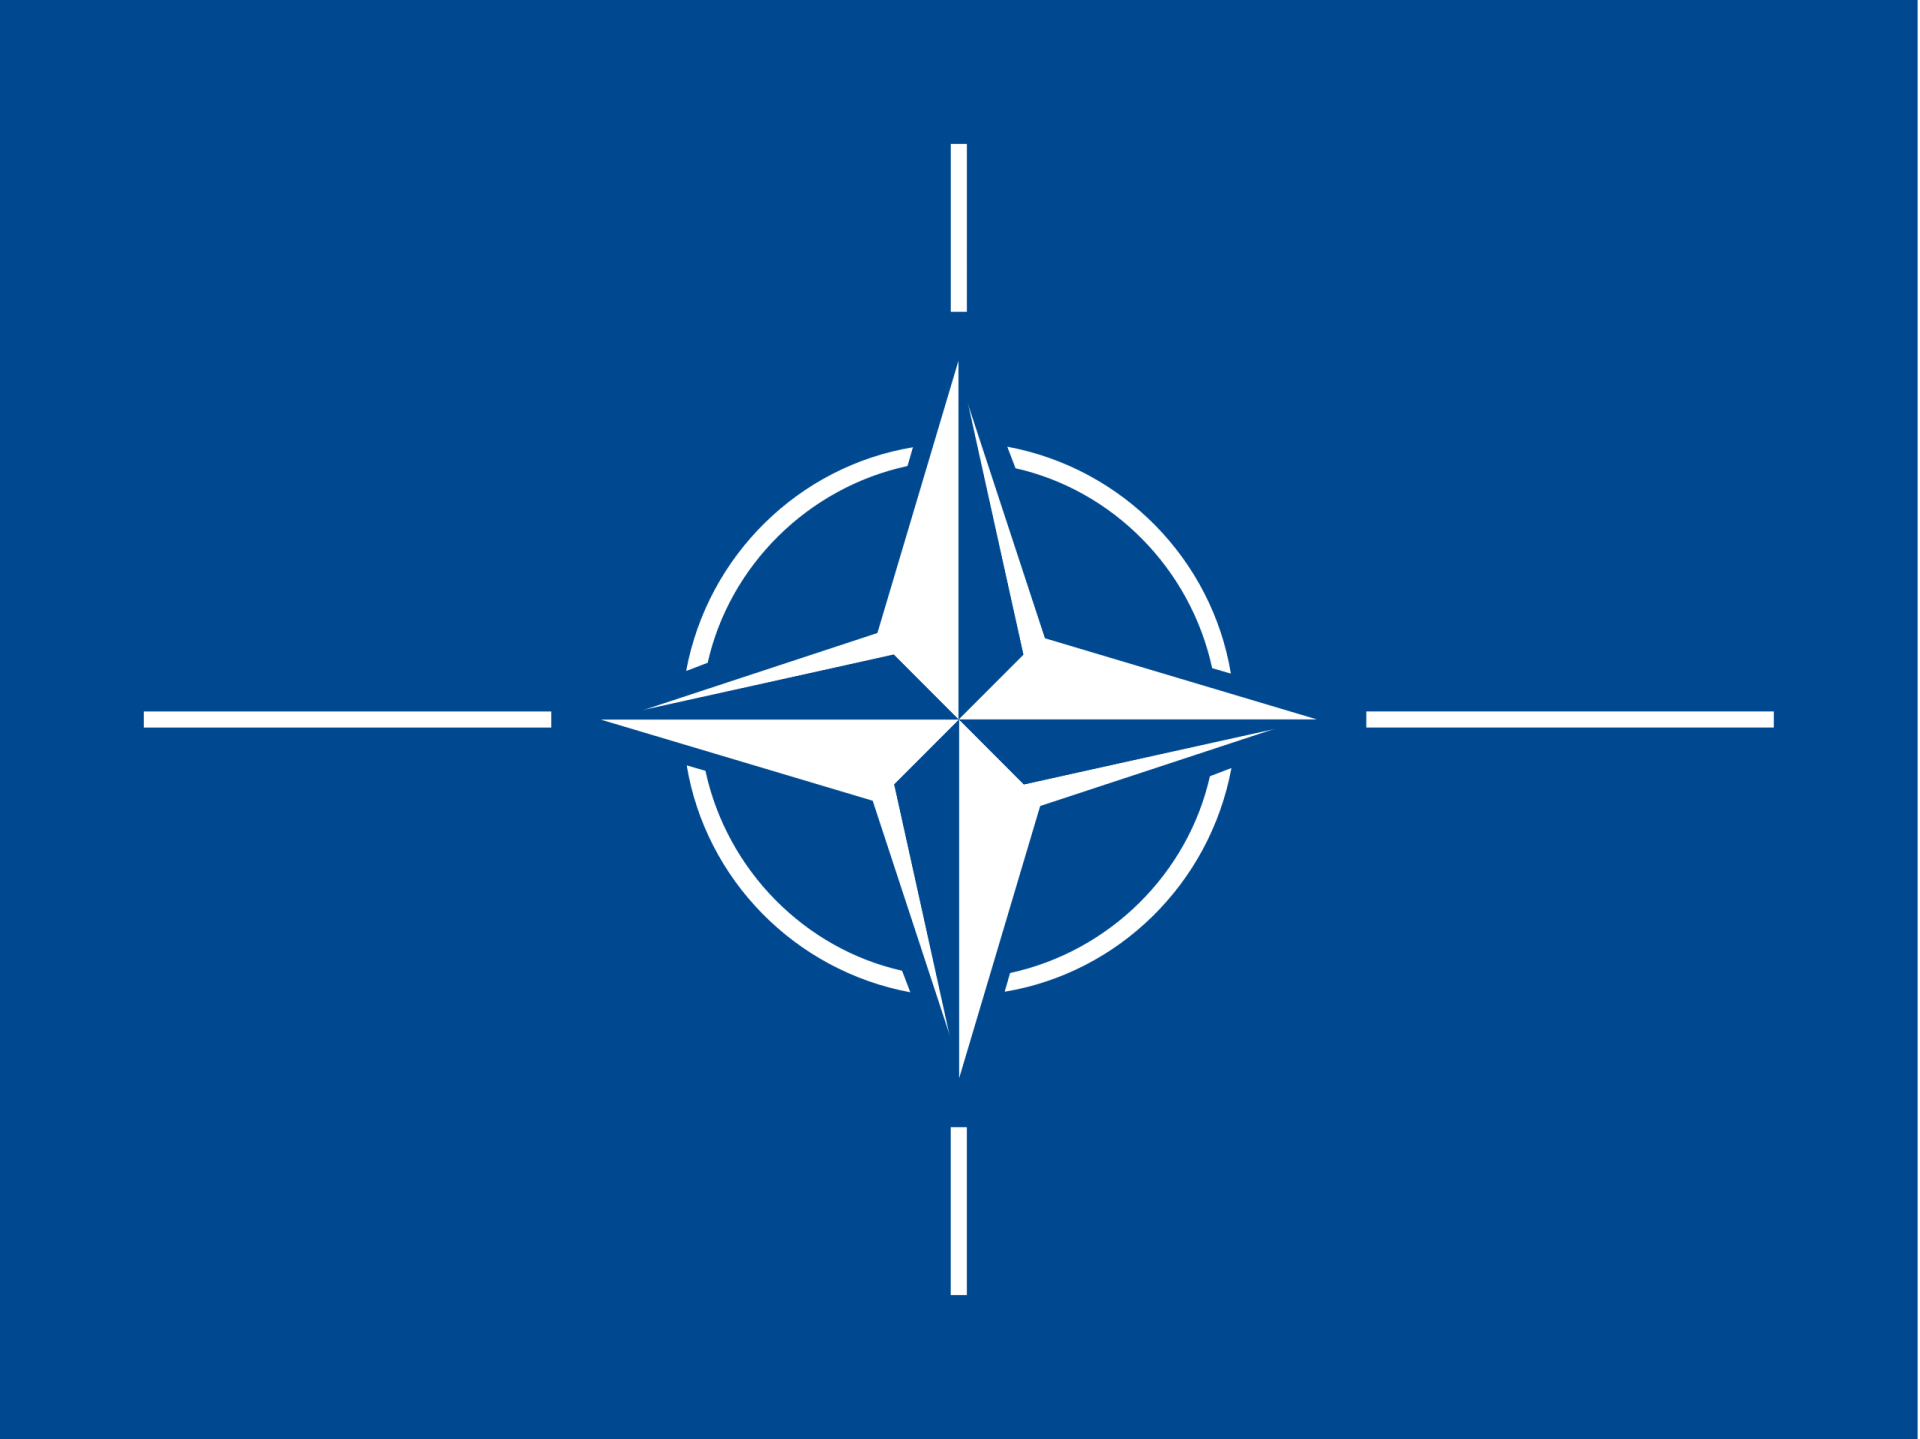 Finland Joins NATO: A New Chapter in European Security